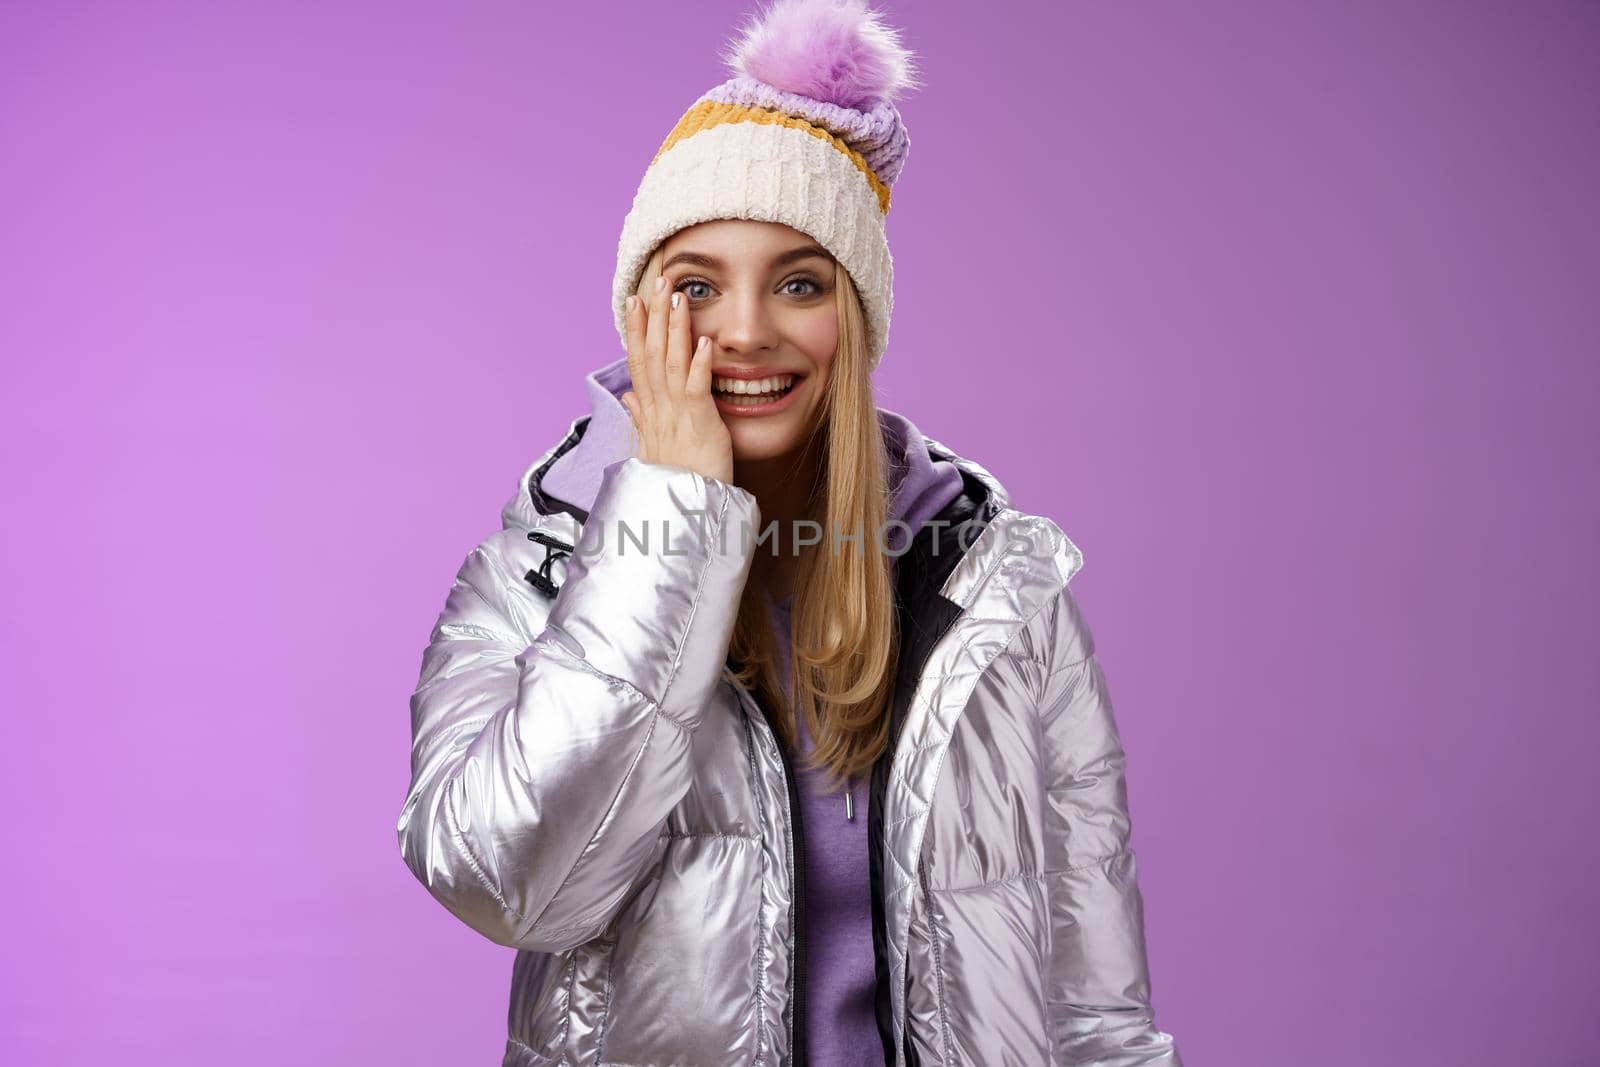 Delighted amused tender blond girlfriend fool around look playful playing snowballs touch cheek astonished feel dream come true enjoying vacation winter holidays boyfriend, standing purple background.